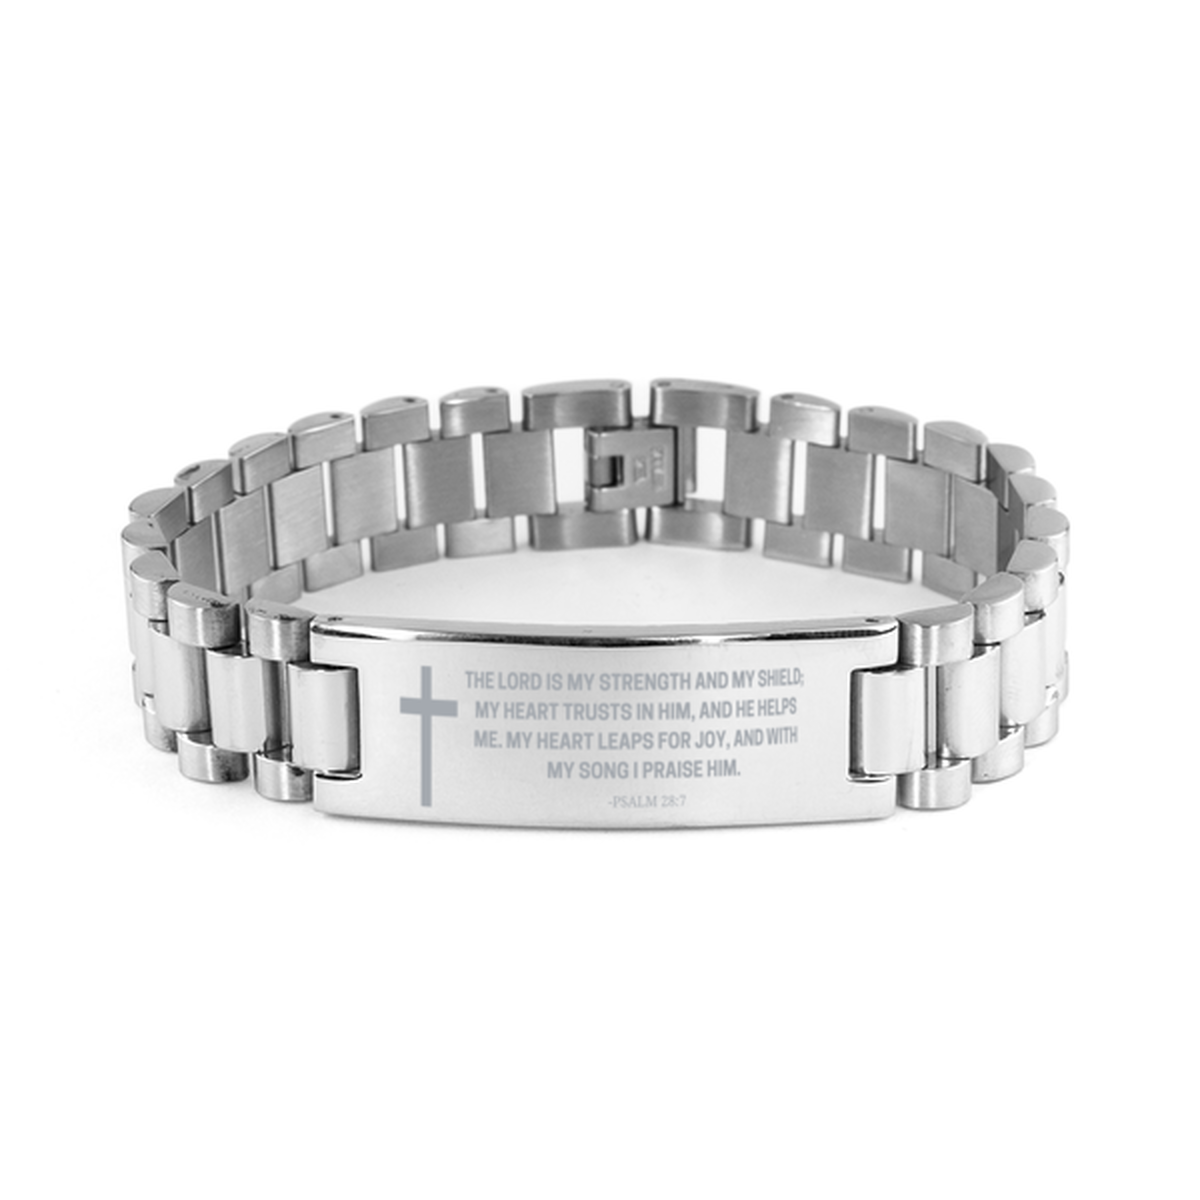 Baptism Gifts For Teenage Boys Girls, Christian Bible Verse Ladder Stainless Steel Bracelet, The Lord is my strength and my shield, Catholic Confirmation Gifts for Son, Godson, Grandson, Nephew